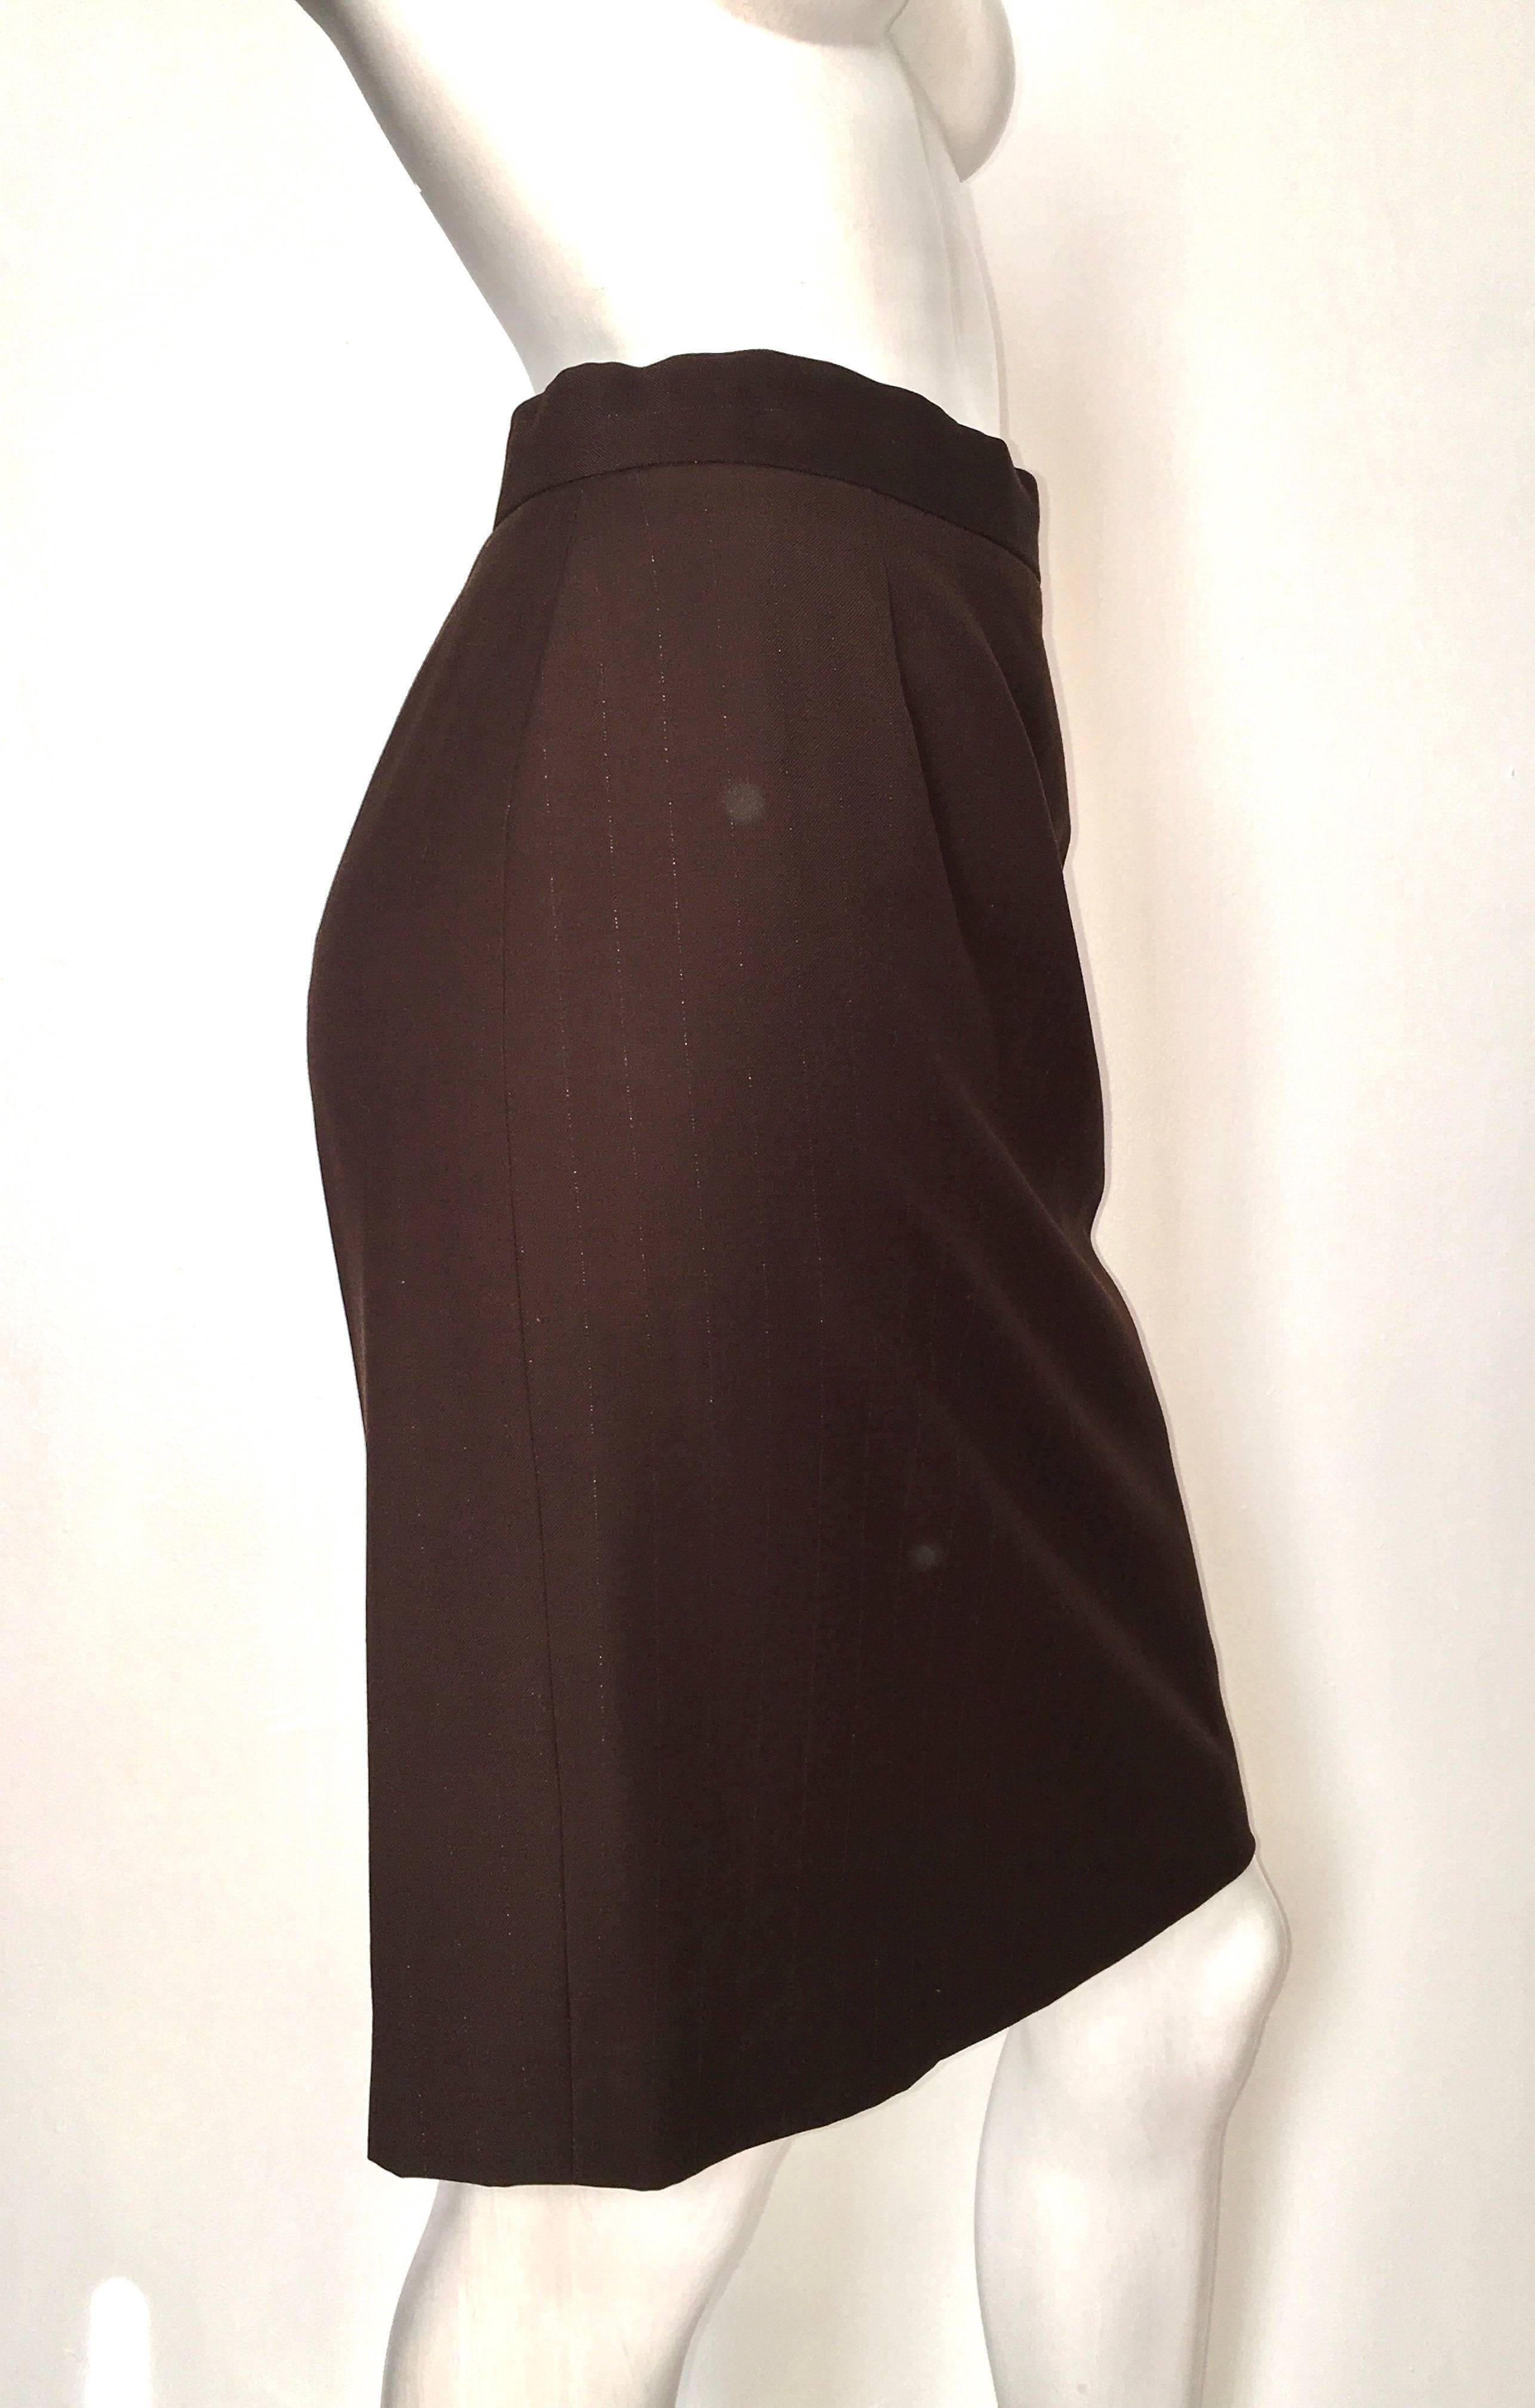 Givenchy Couture 1990s brown wool with very faint silver metallic pin strips is a French size 38 and will fit an USA size 4.  Ladies please grab your tape measure so you can properly measure your waist & hips to make certain this will fit your